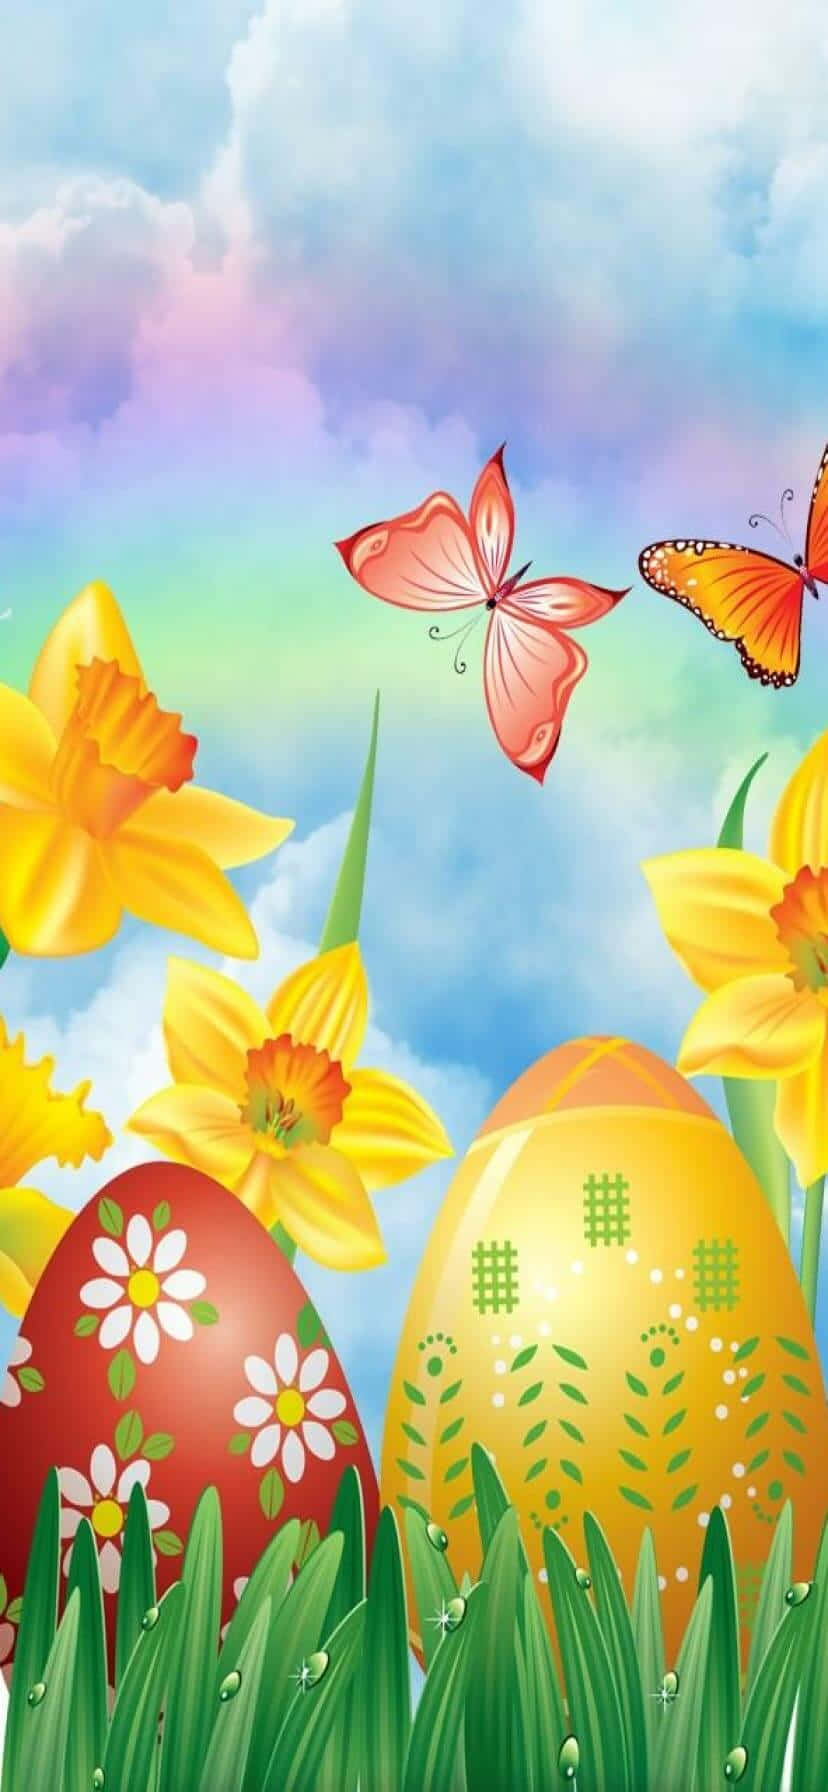 Funny Easter Eggs With Butterflies Picture